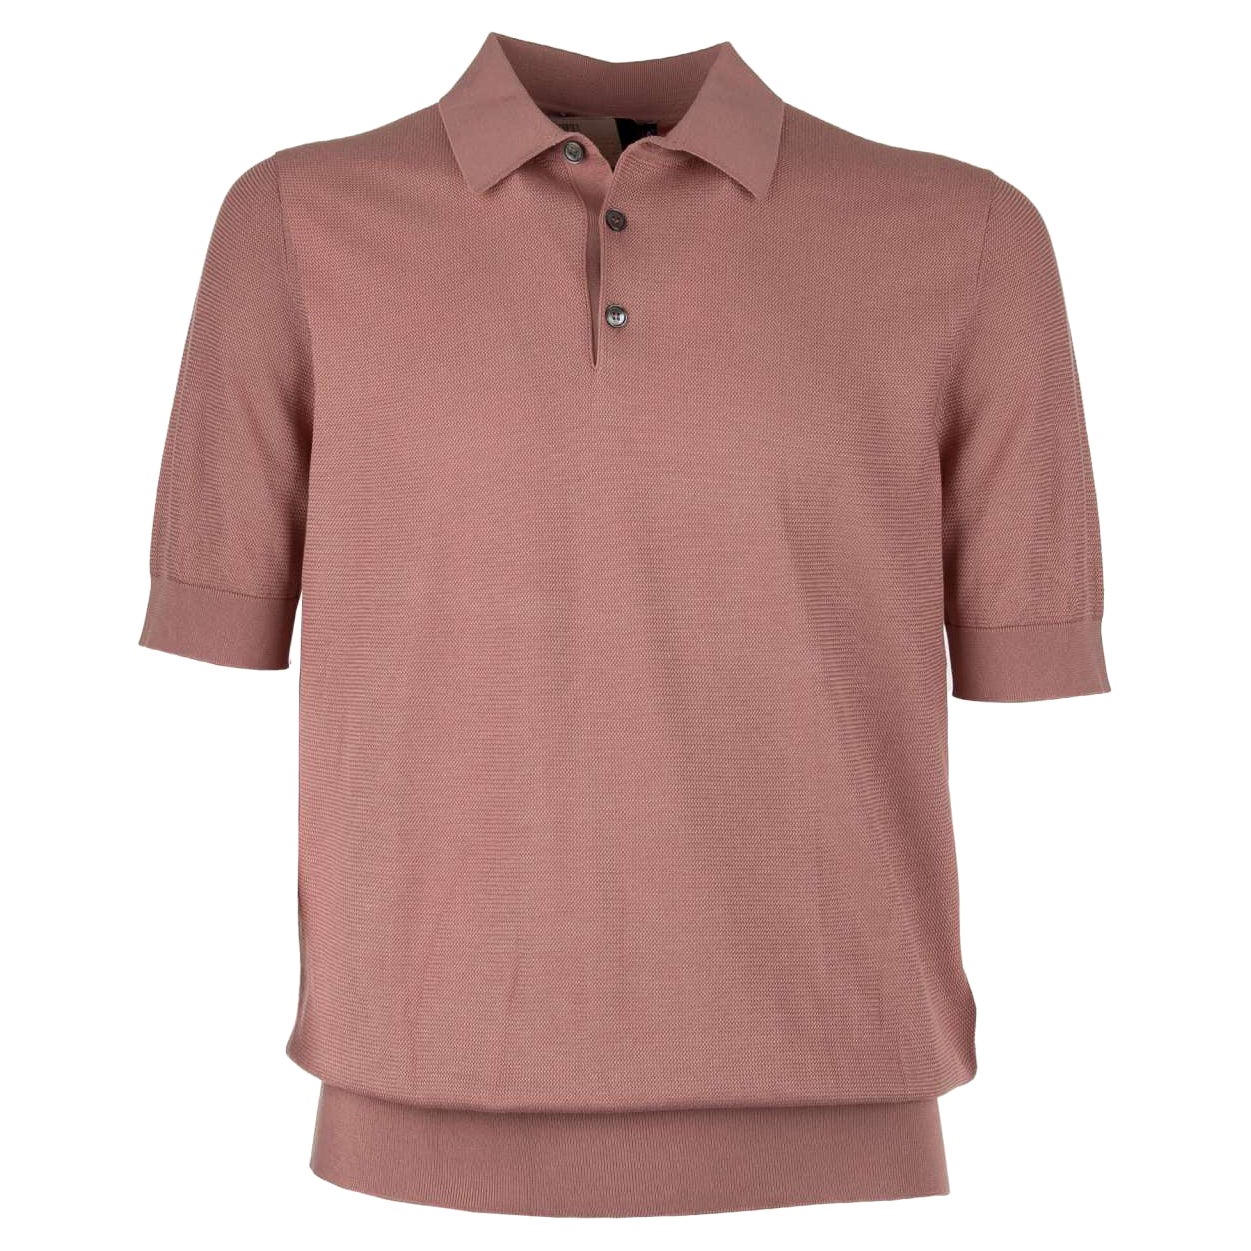 Dolce & Gabbana - Silk Polo Shirt T-Shirt Pink with Pearl Buttons 56 For Sale